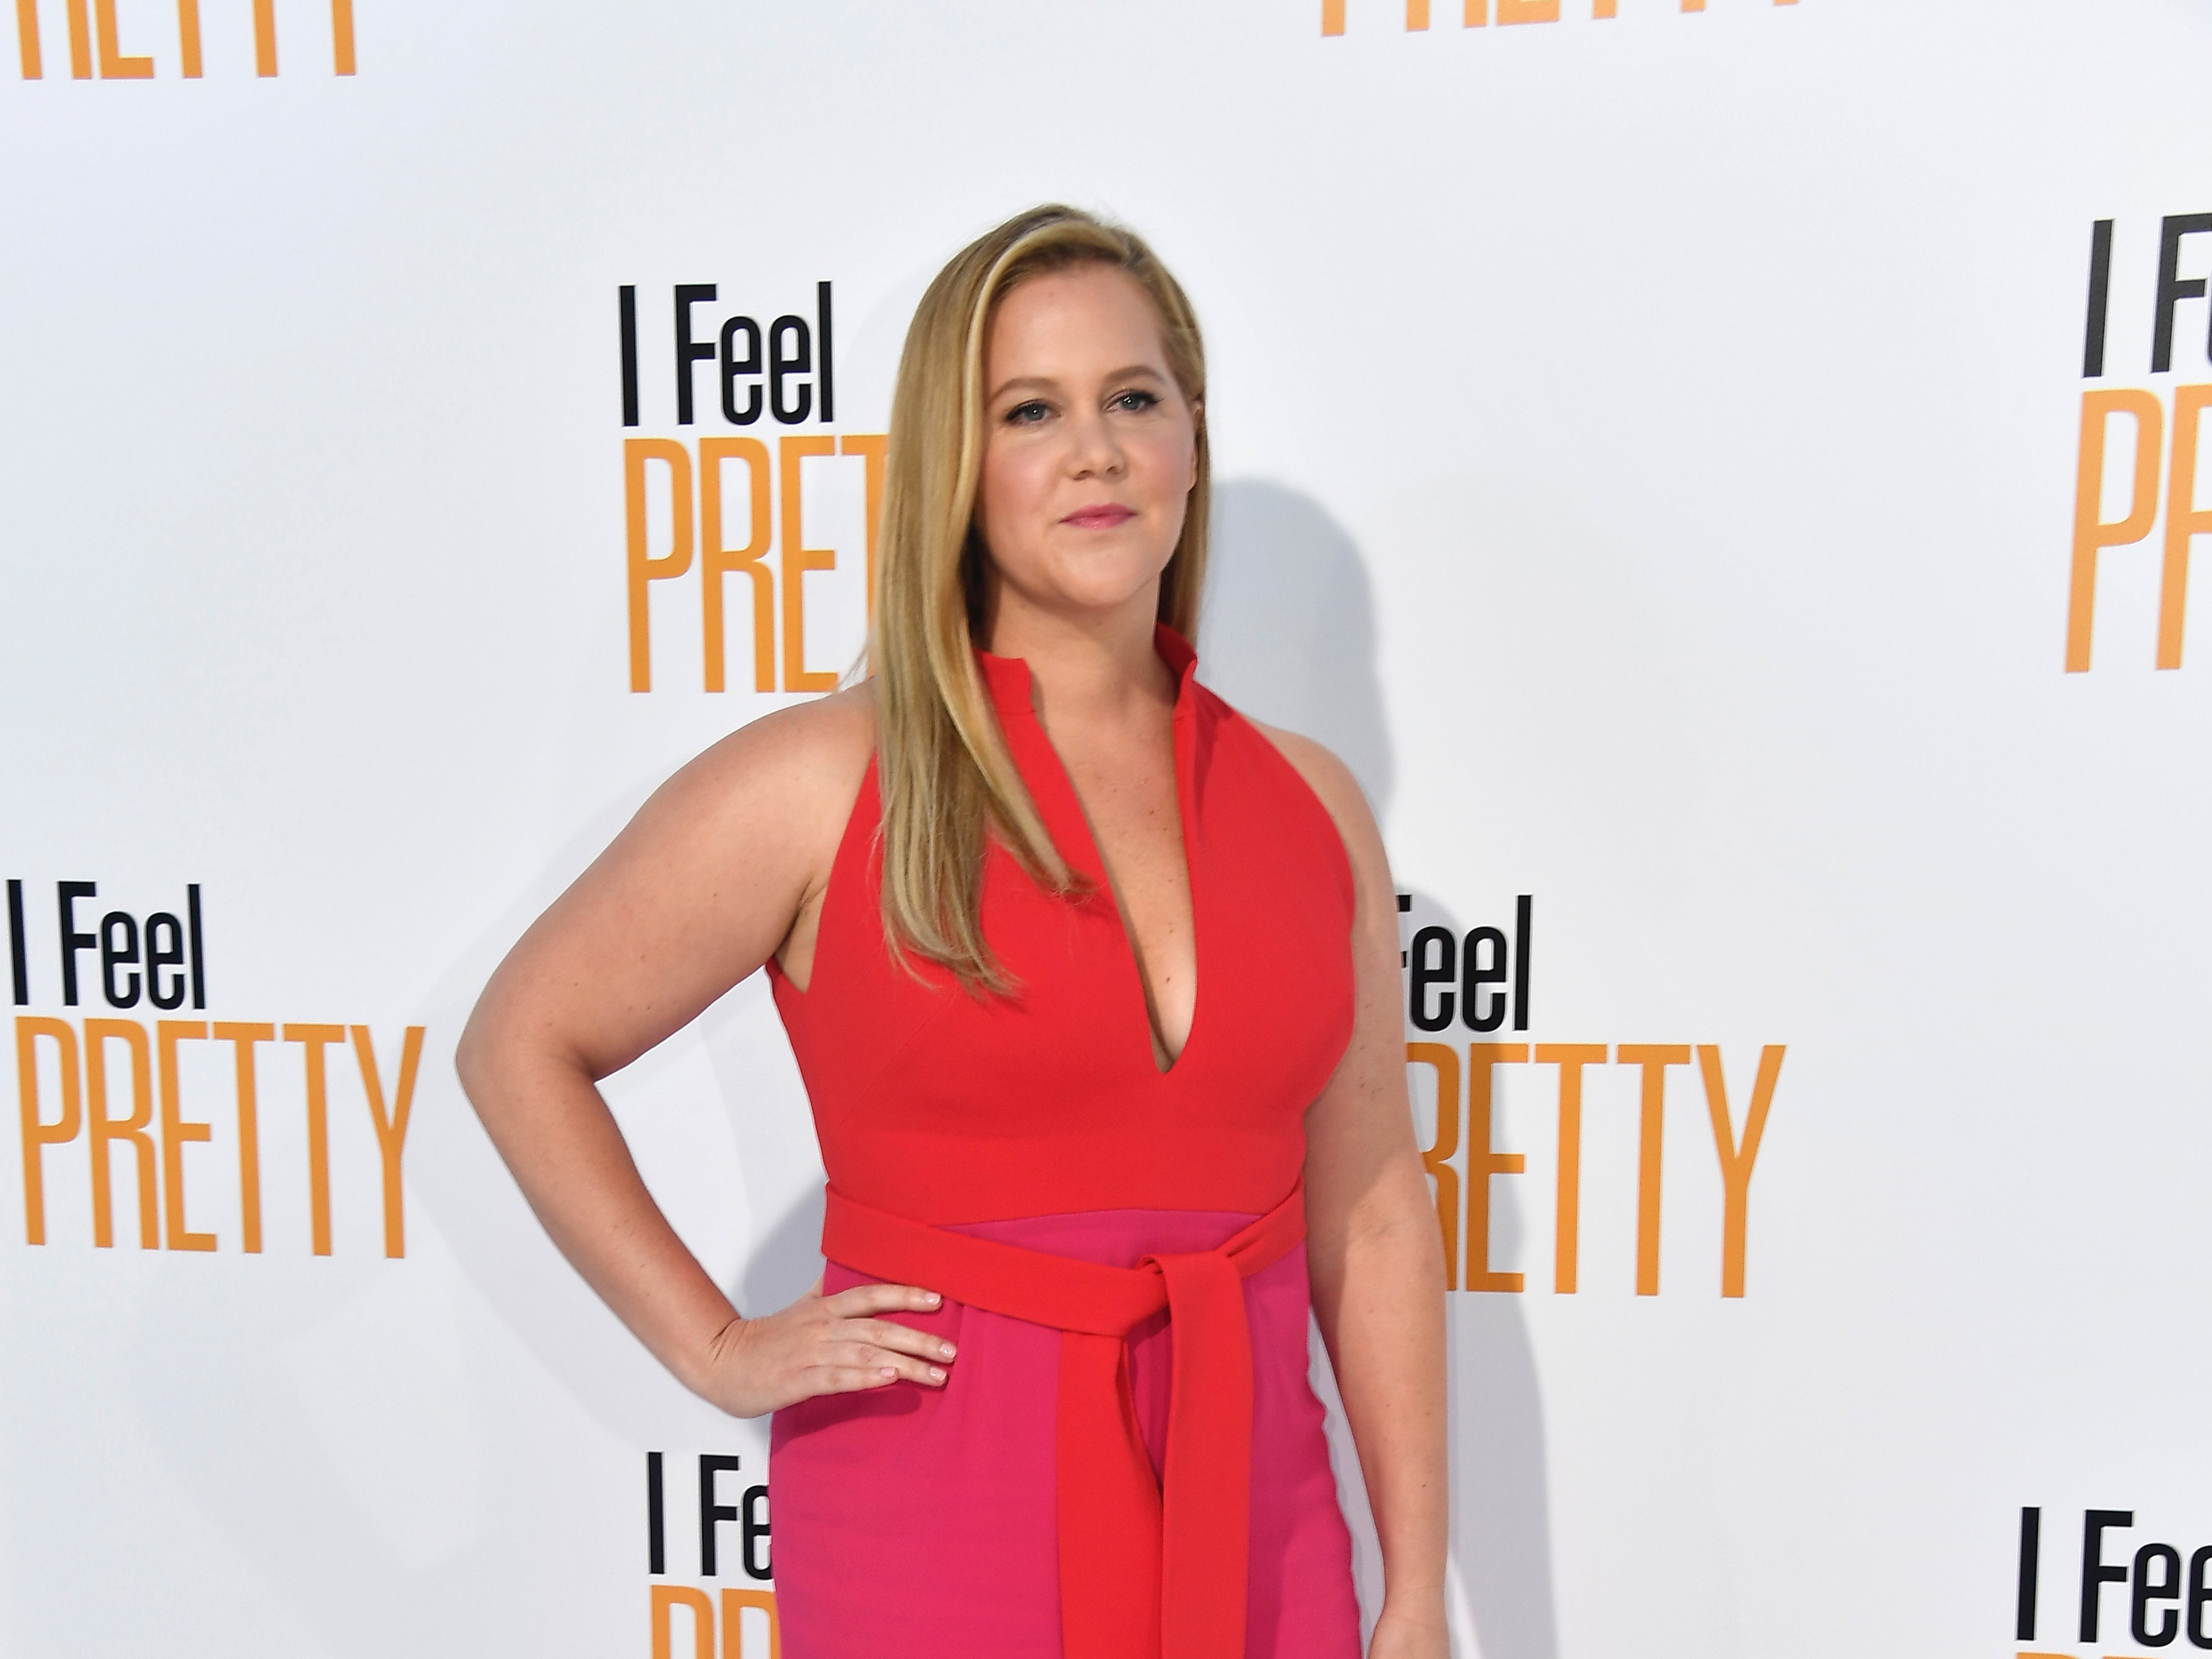 Amy Schumer opens up about liposuction